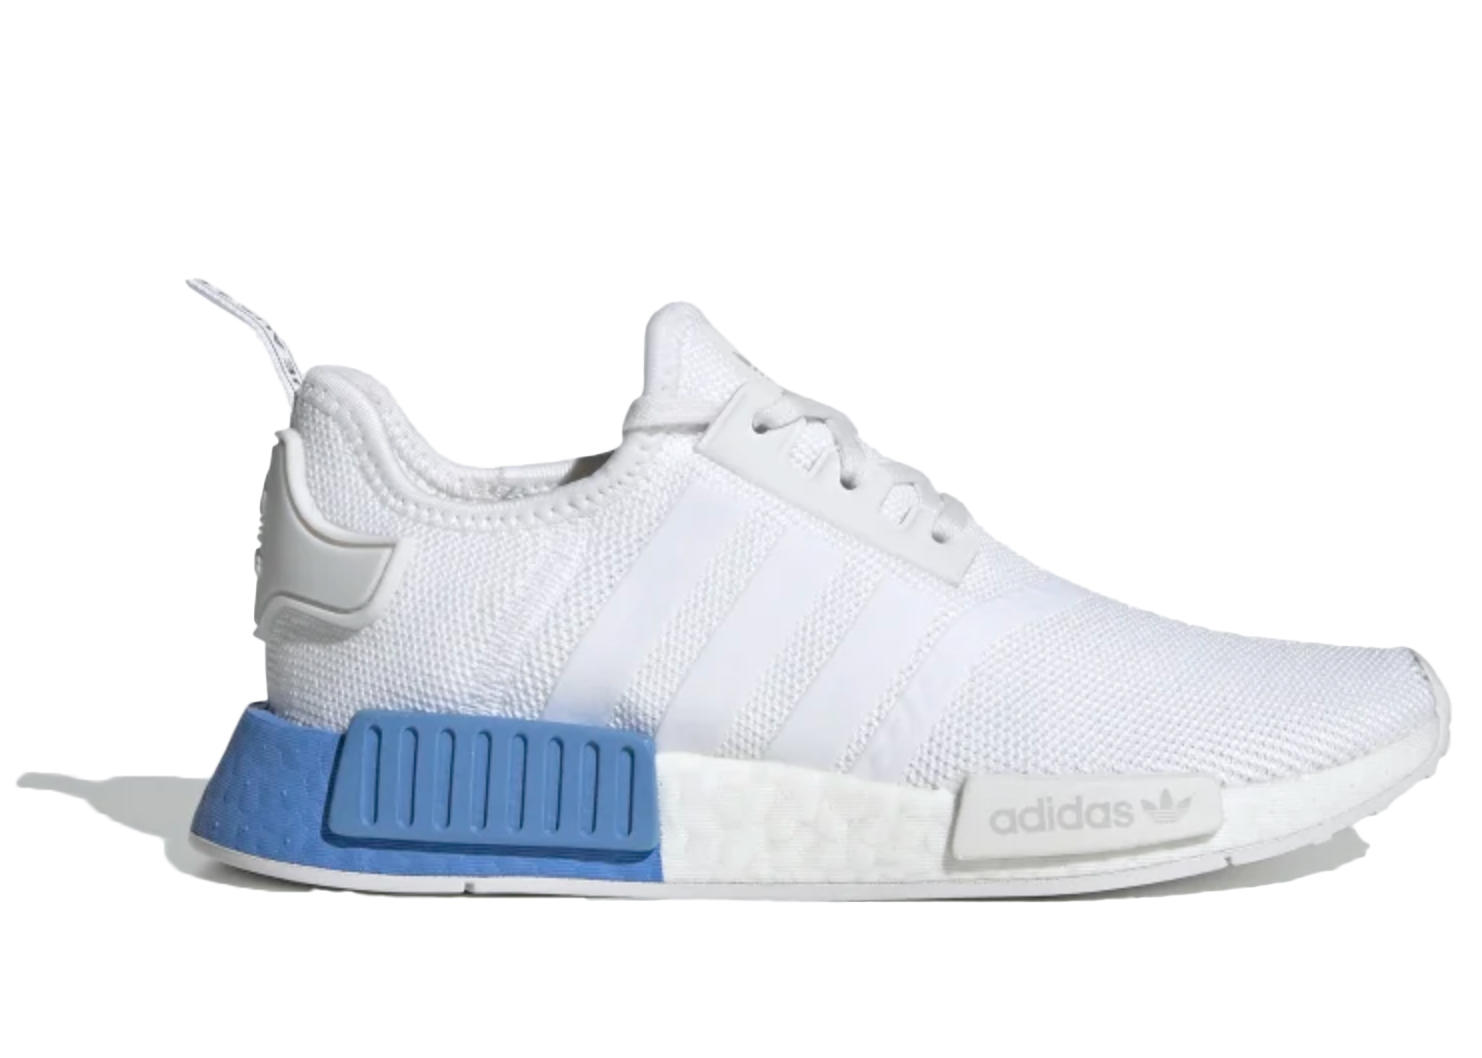 adidas adidas NMD R1 Cloud White Real Blue (GS) EE6677